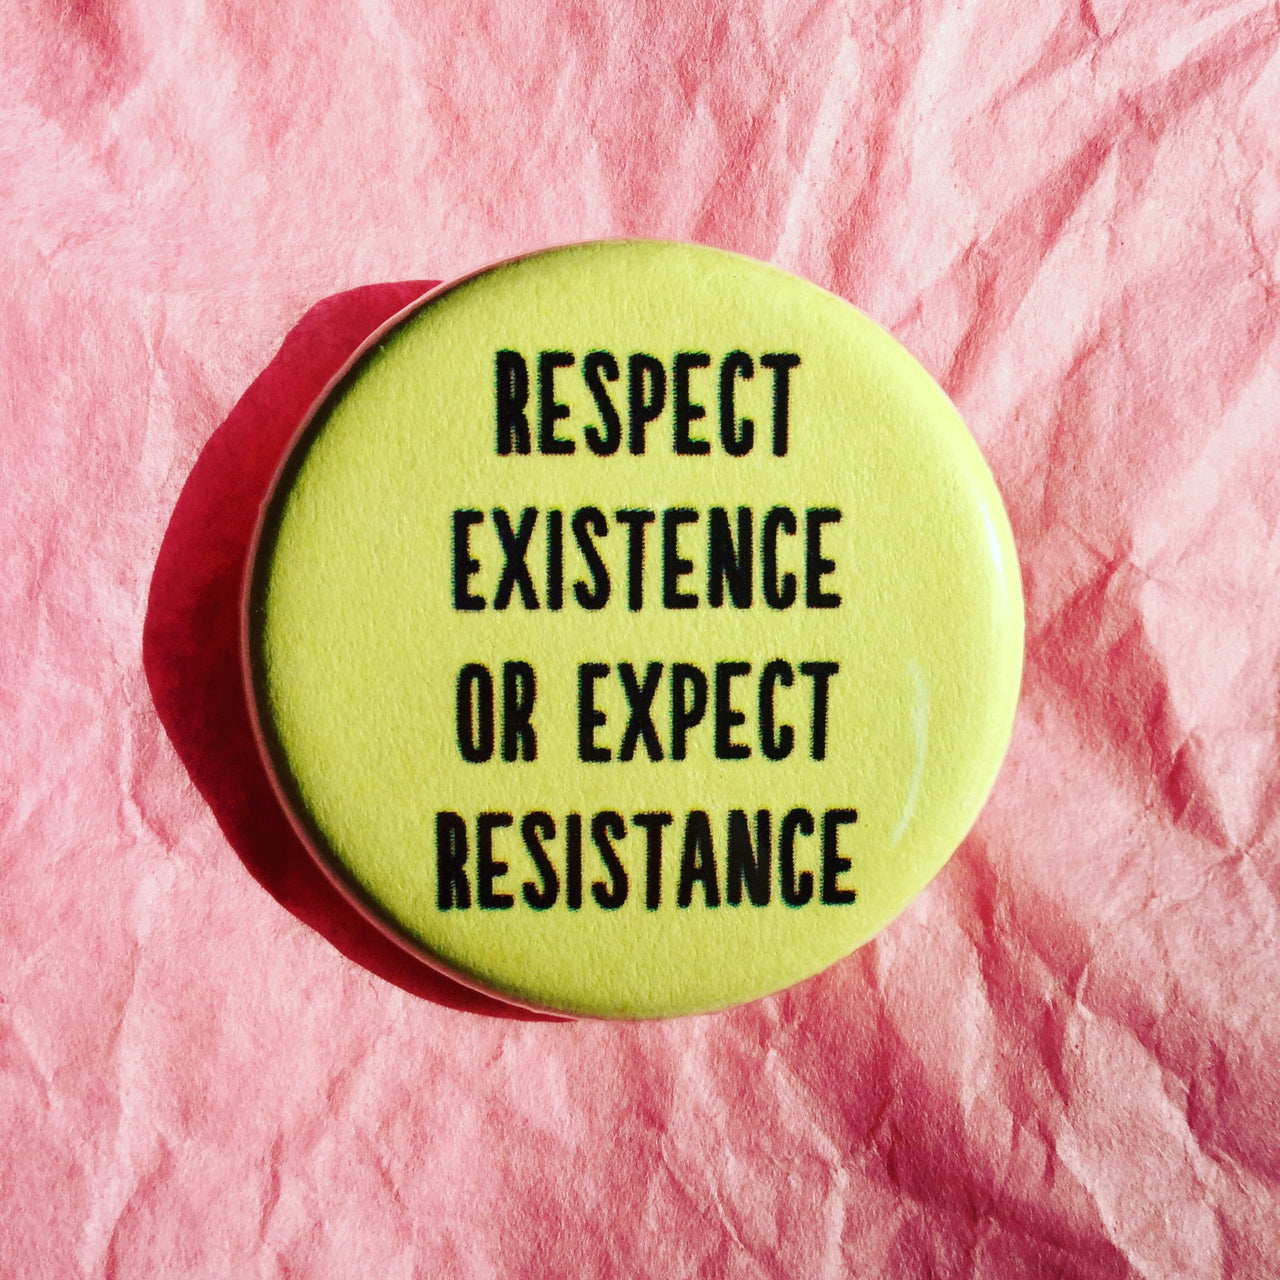 Respect existence or expect resistance - Radical Buttons